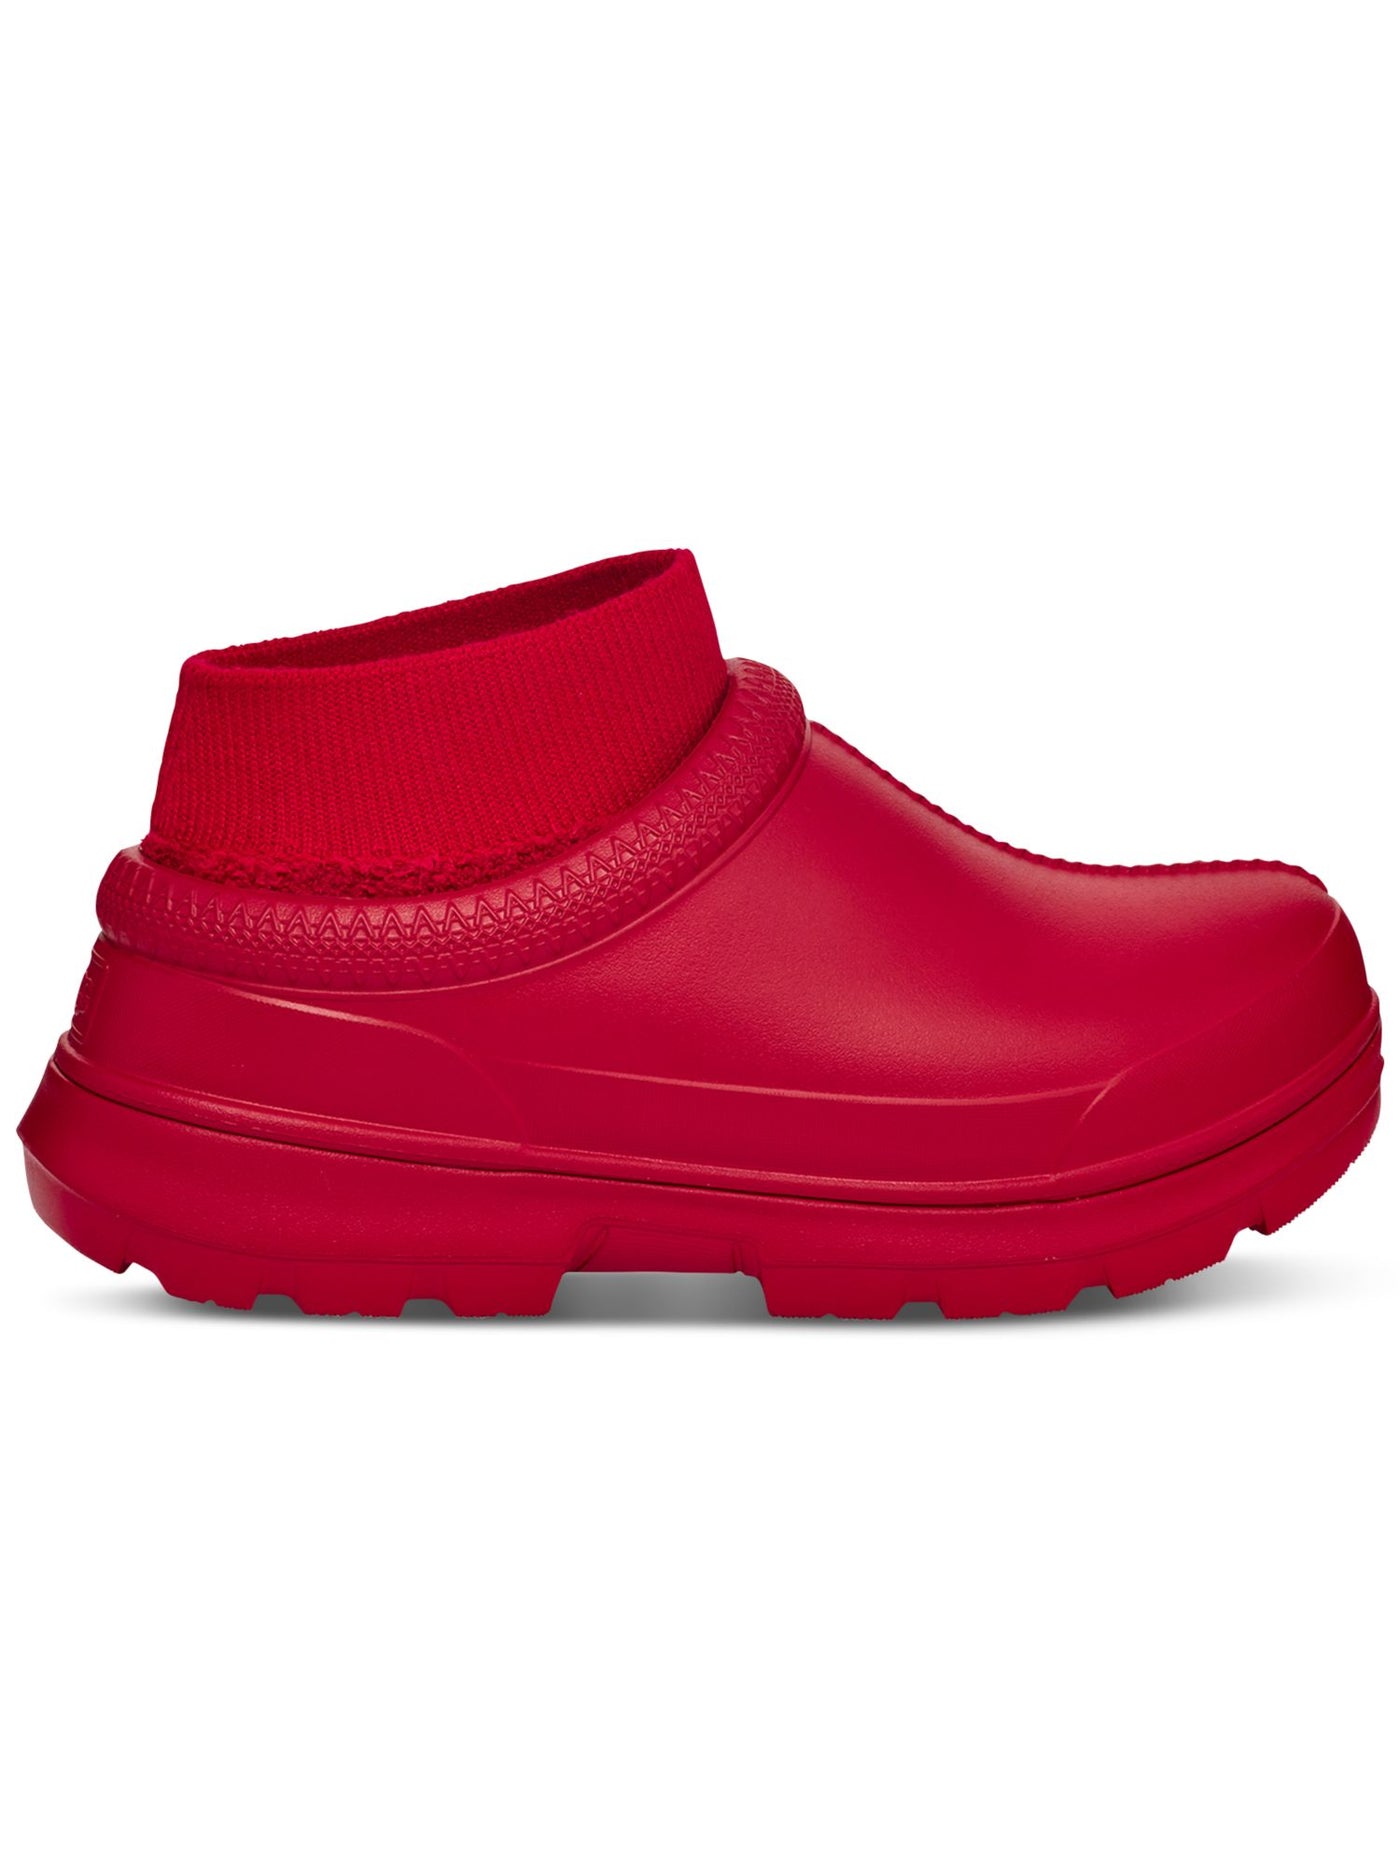 UGG Womens Red Removable Sock Waterproof Moisture Wicking Tasman X Round Toe Wedge Slip On Clogs Shoes 5